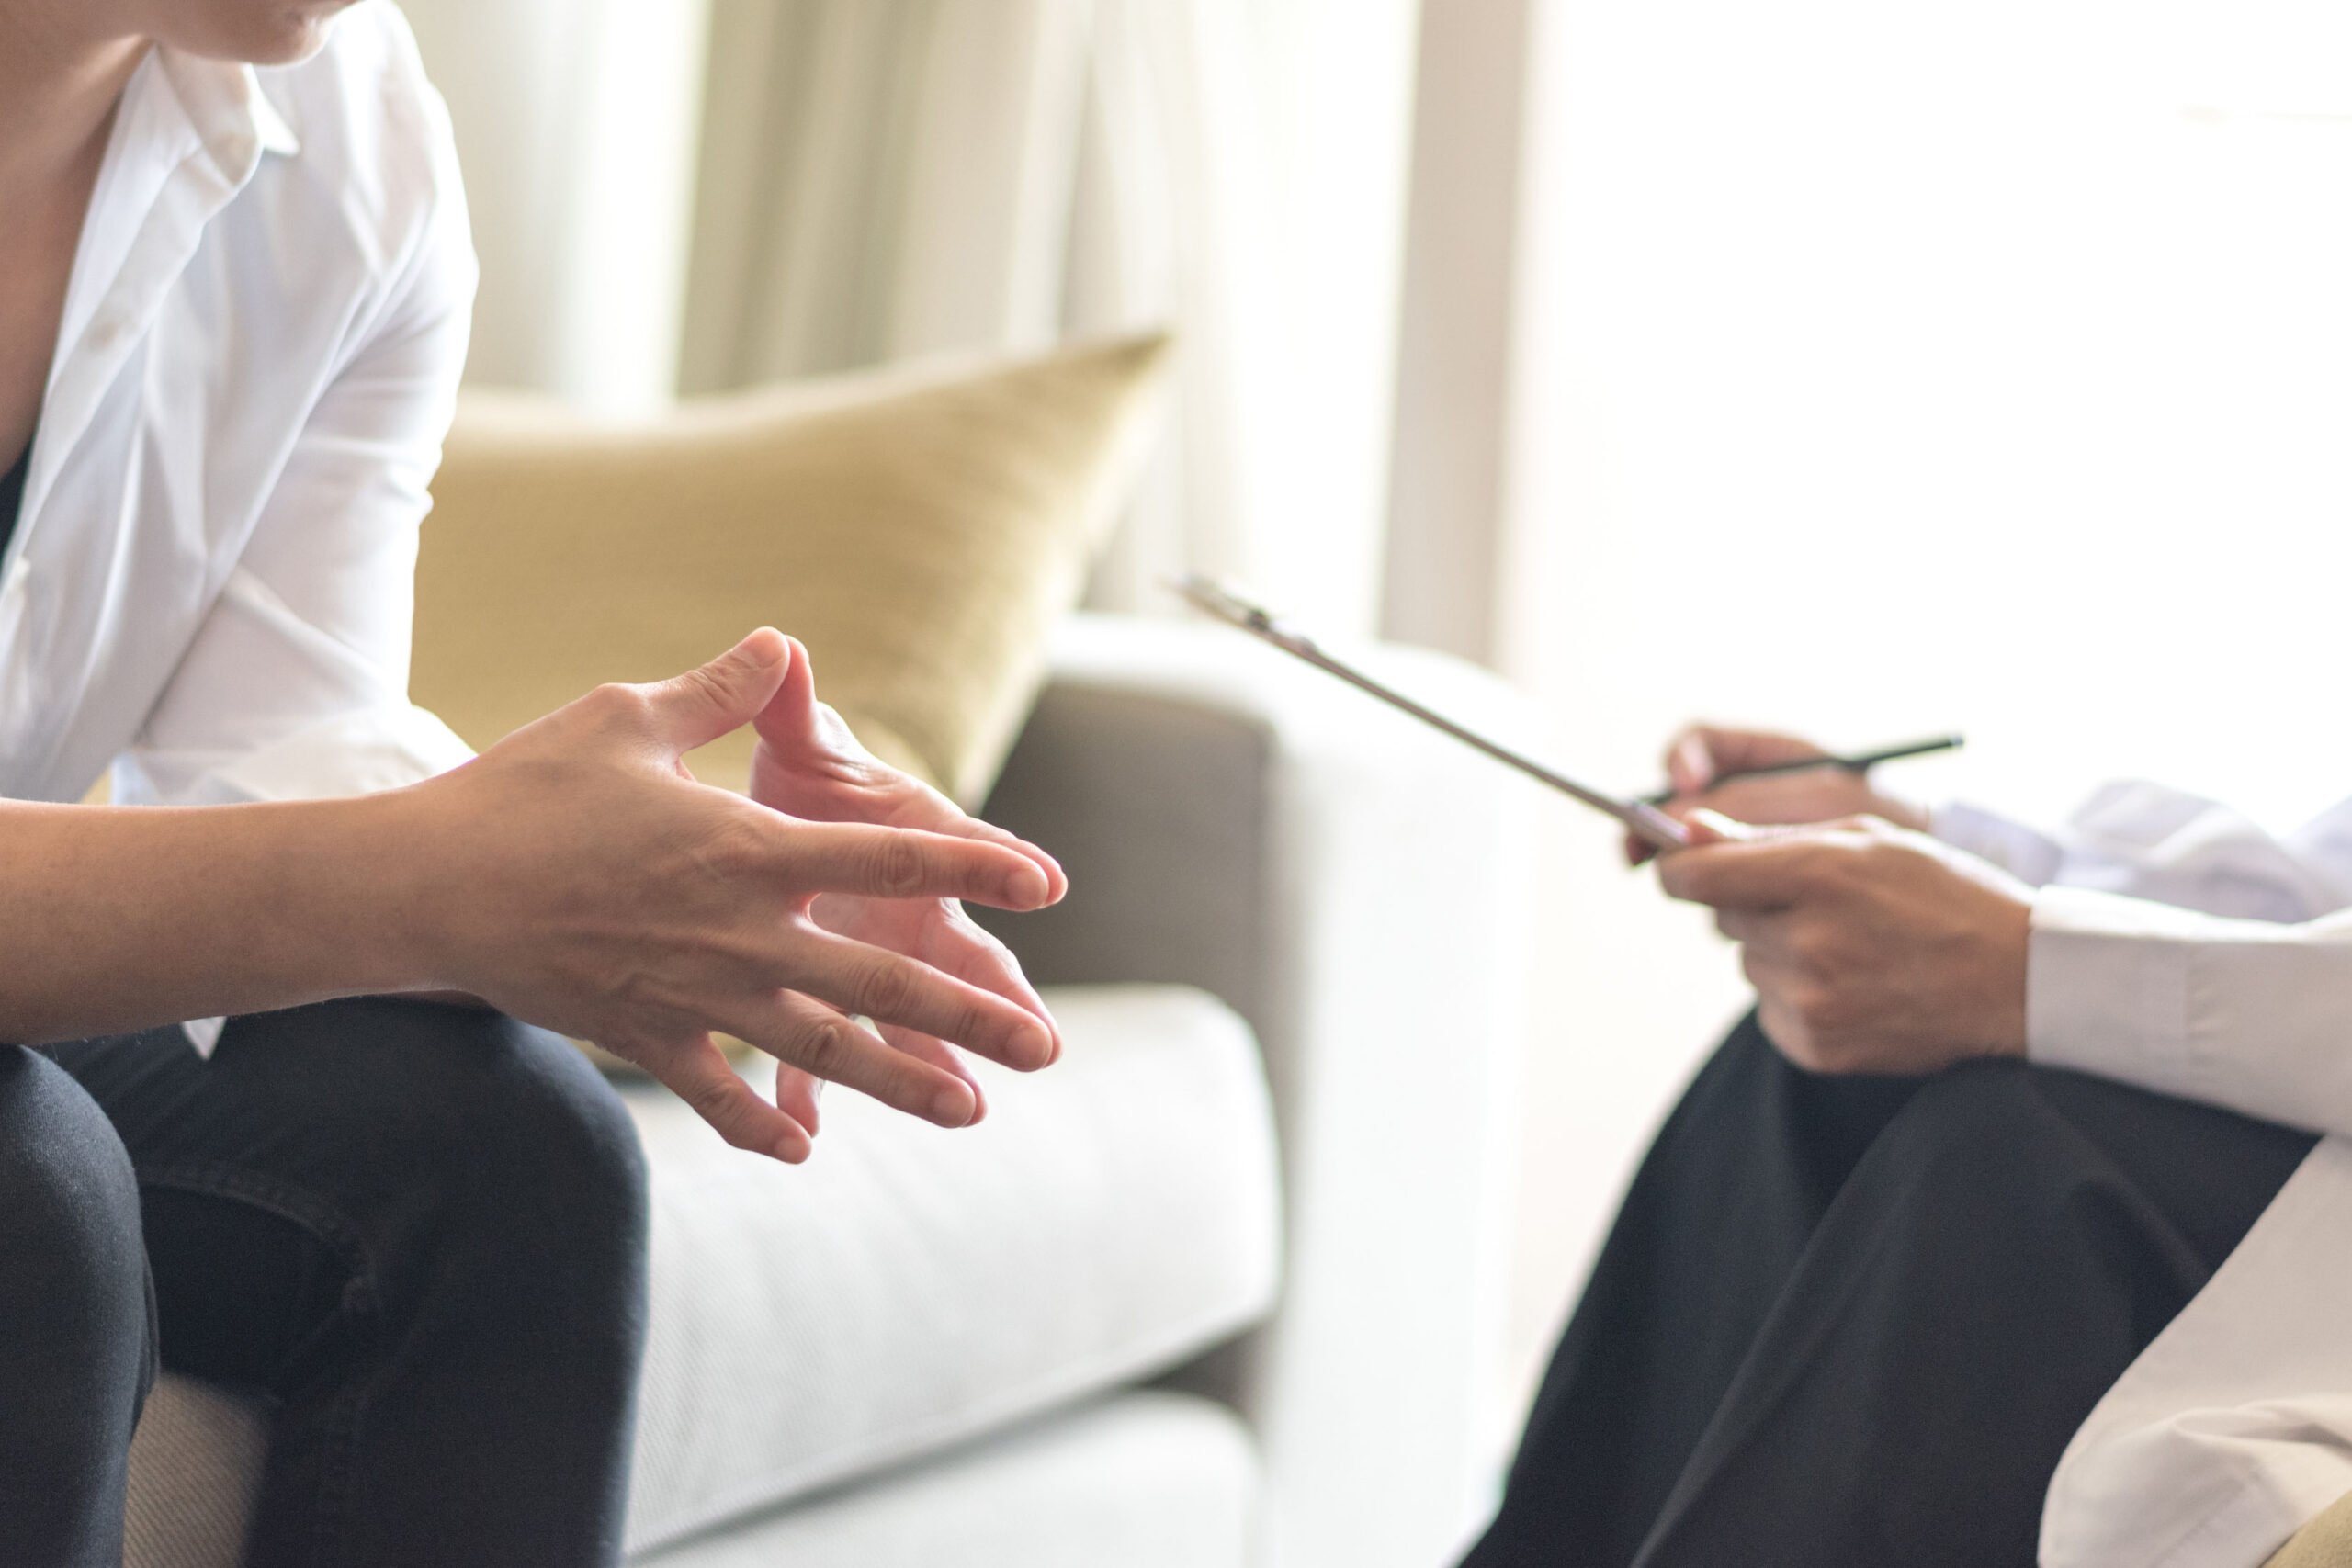 4 Qualities to Look For in a Dependable Psychiatrist